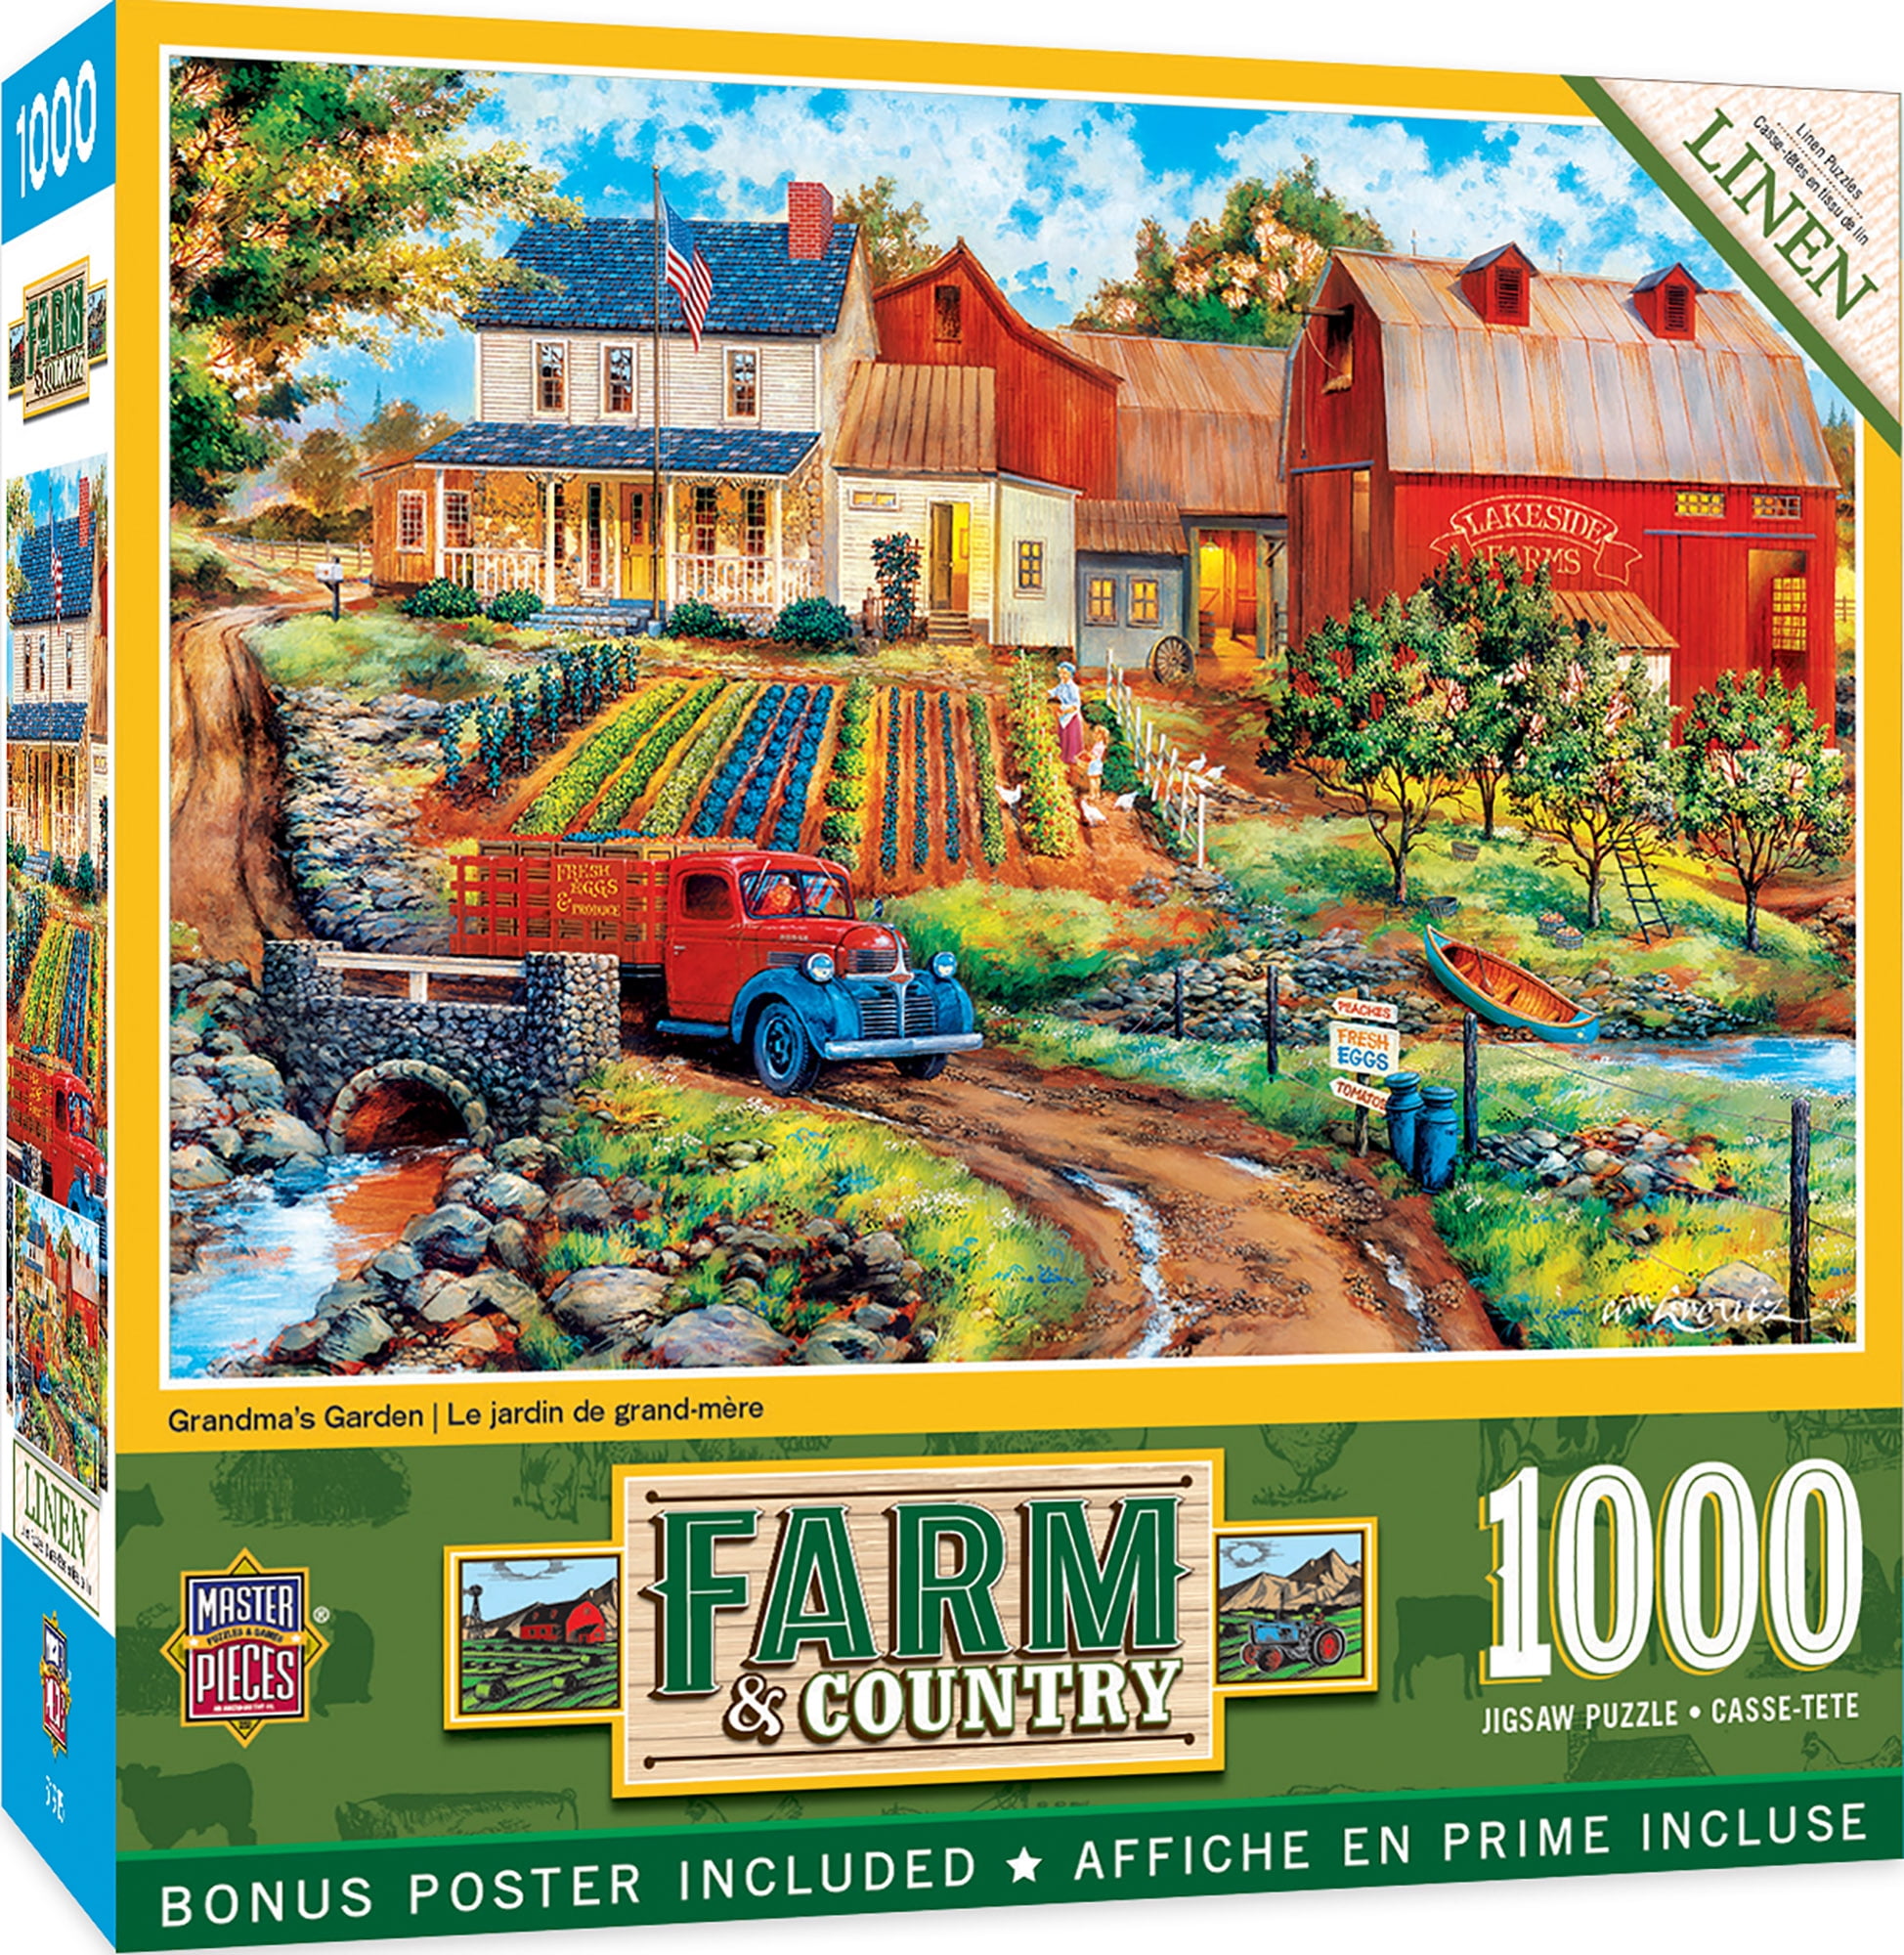 Cardinal Games Farm Jigsaw Puzzle 1000 Piece 18 X 24 Reference Poster for sale online 